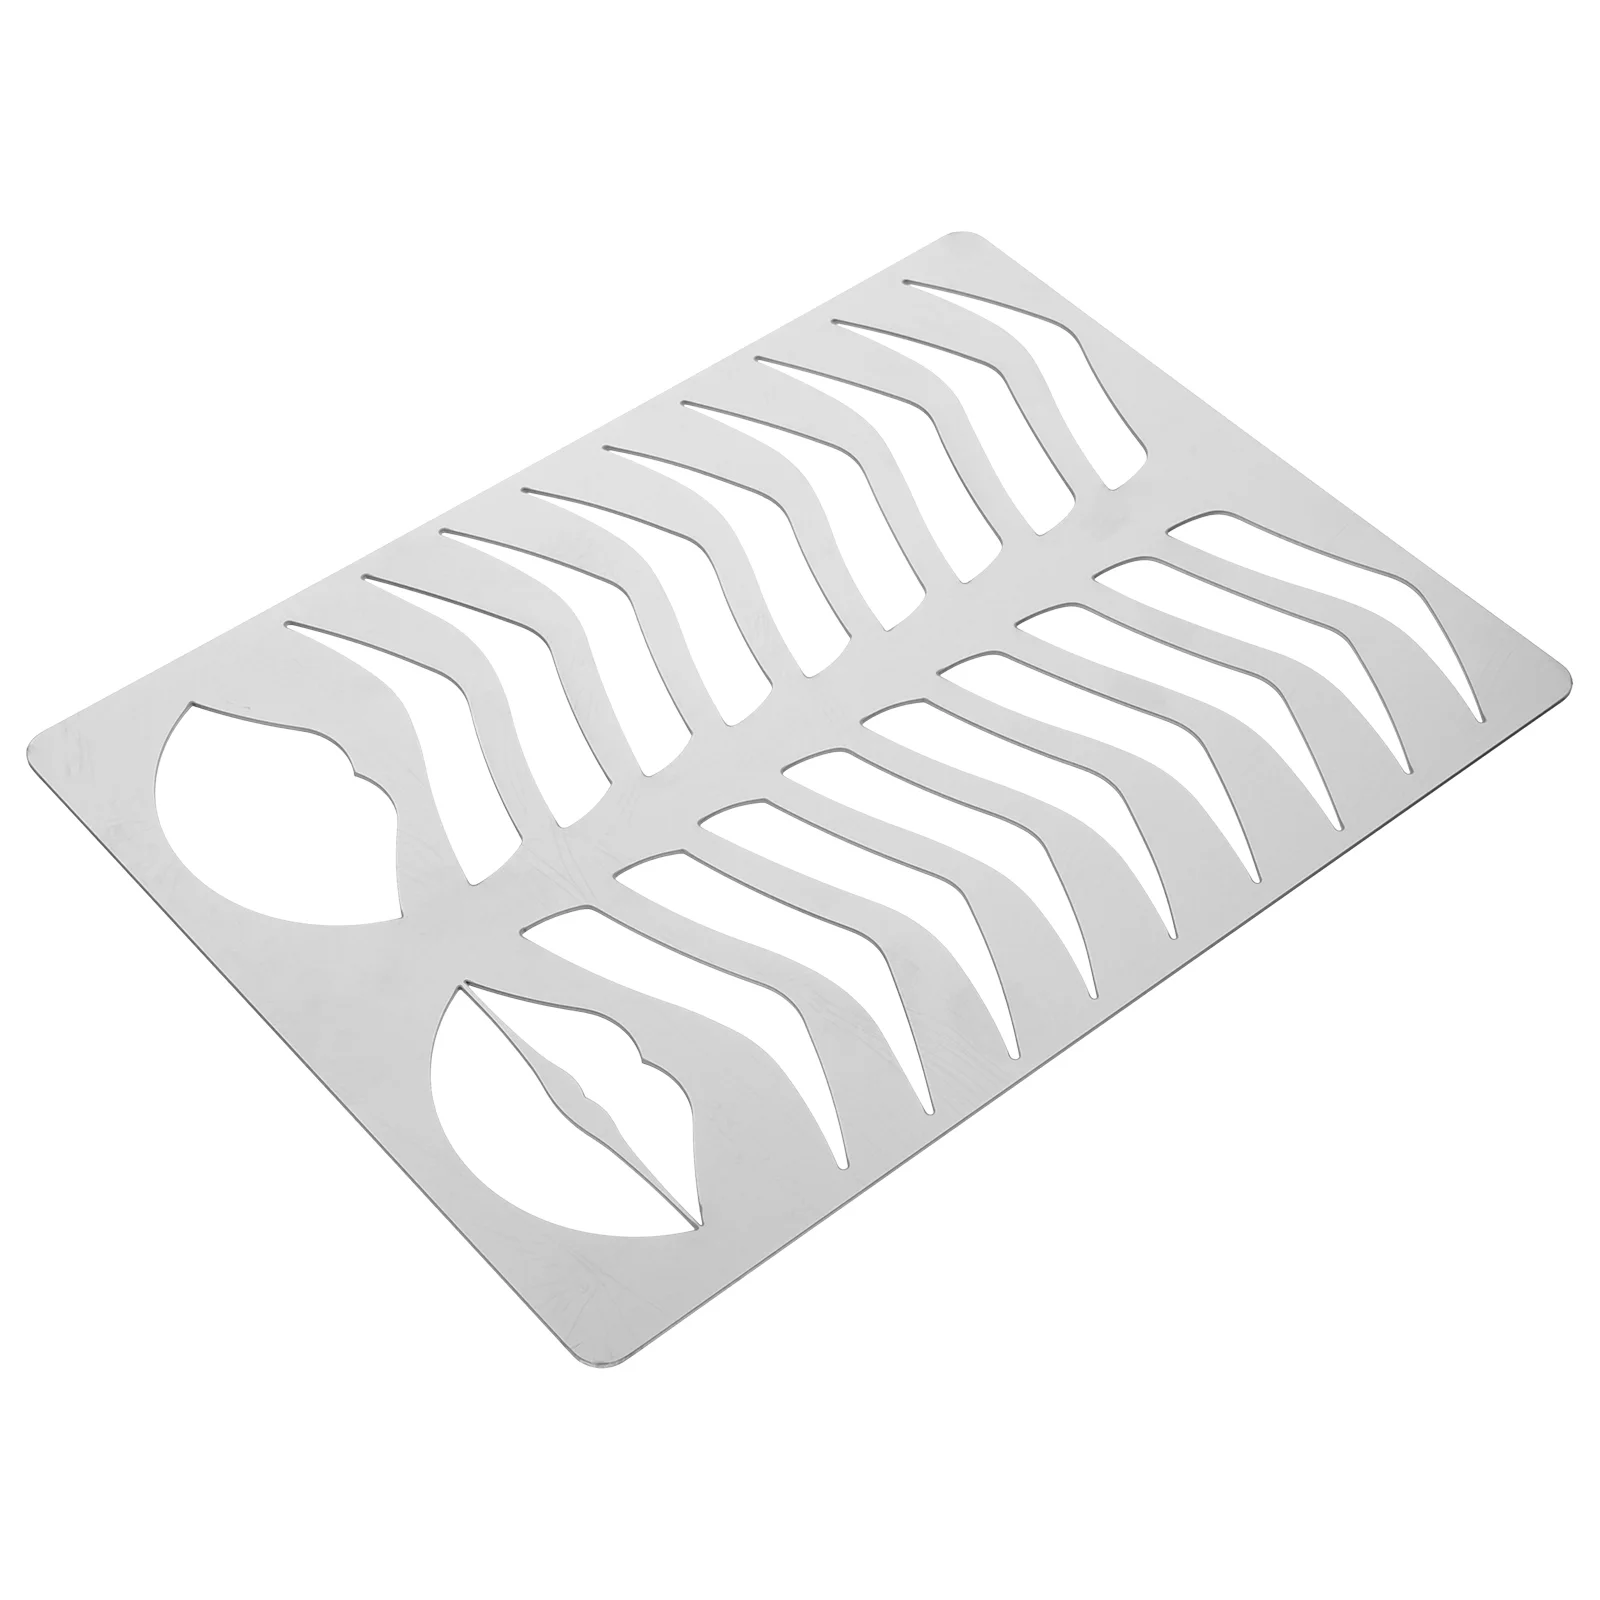 

Mold Eyebrow Draw Board Makeup Practice Accessory Stencil Trimming Lip Metal Drawing Shaping Template